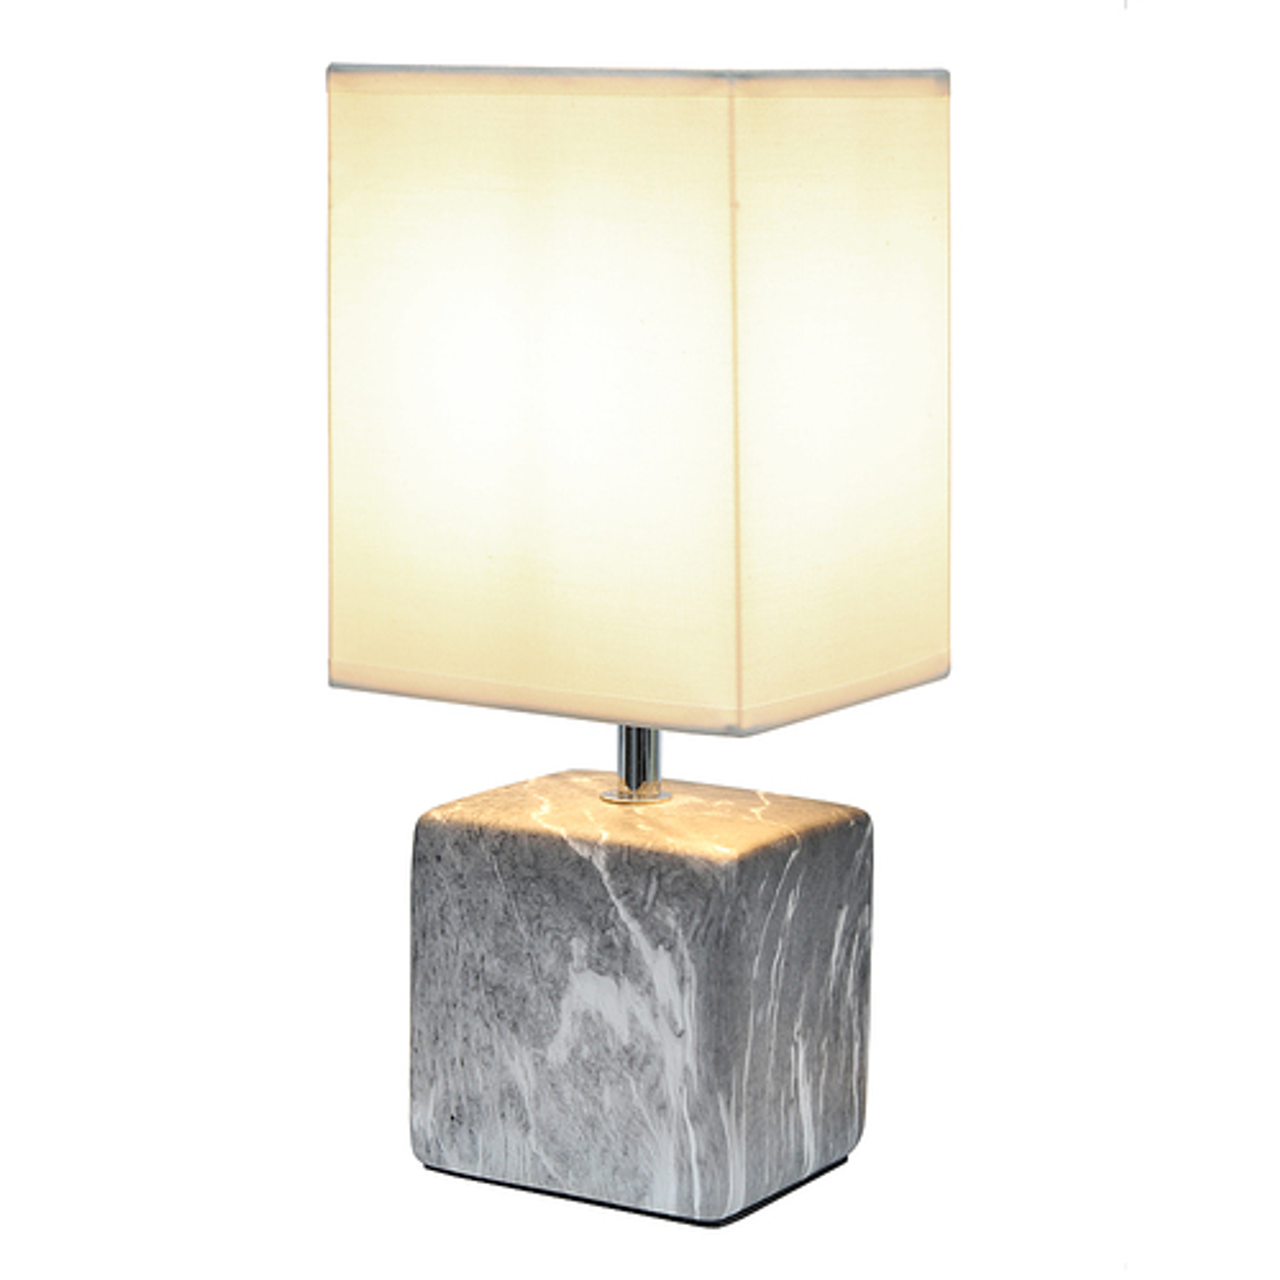 Simple Designs Petite Marbled Ceramic Table Lamp with Fabric Shade, Black with White Shade - Black base/White shade